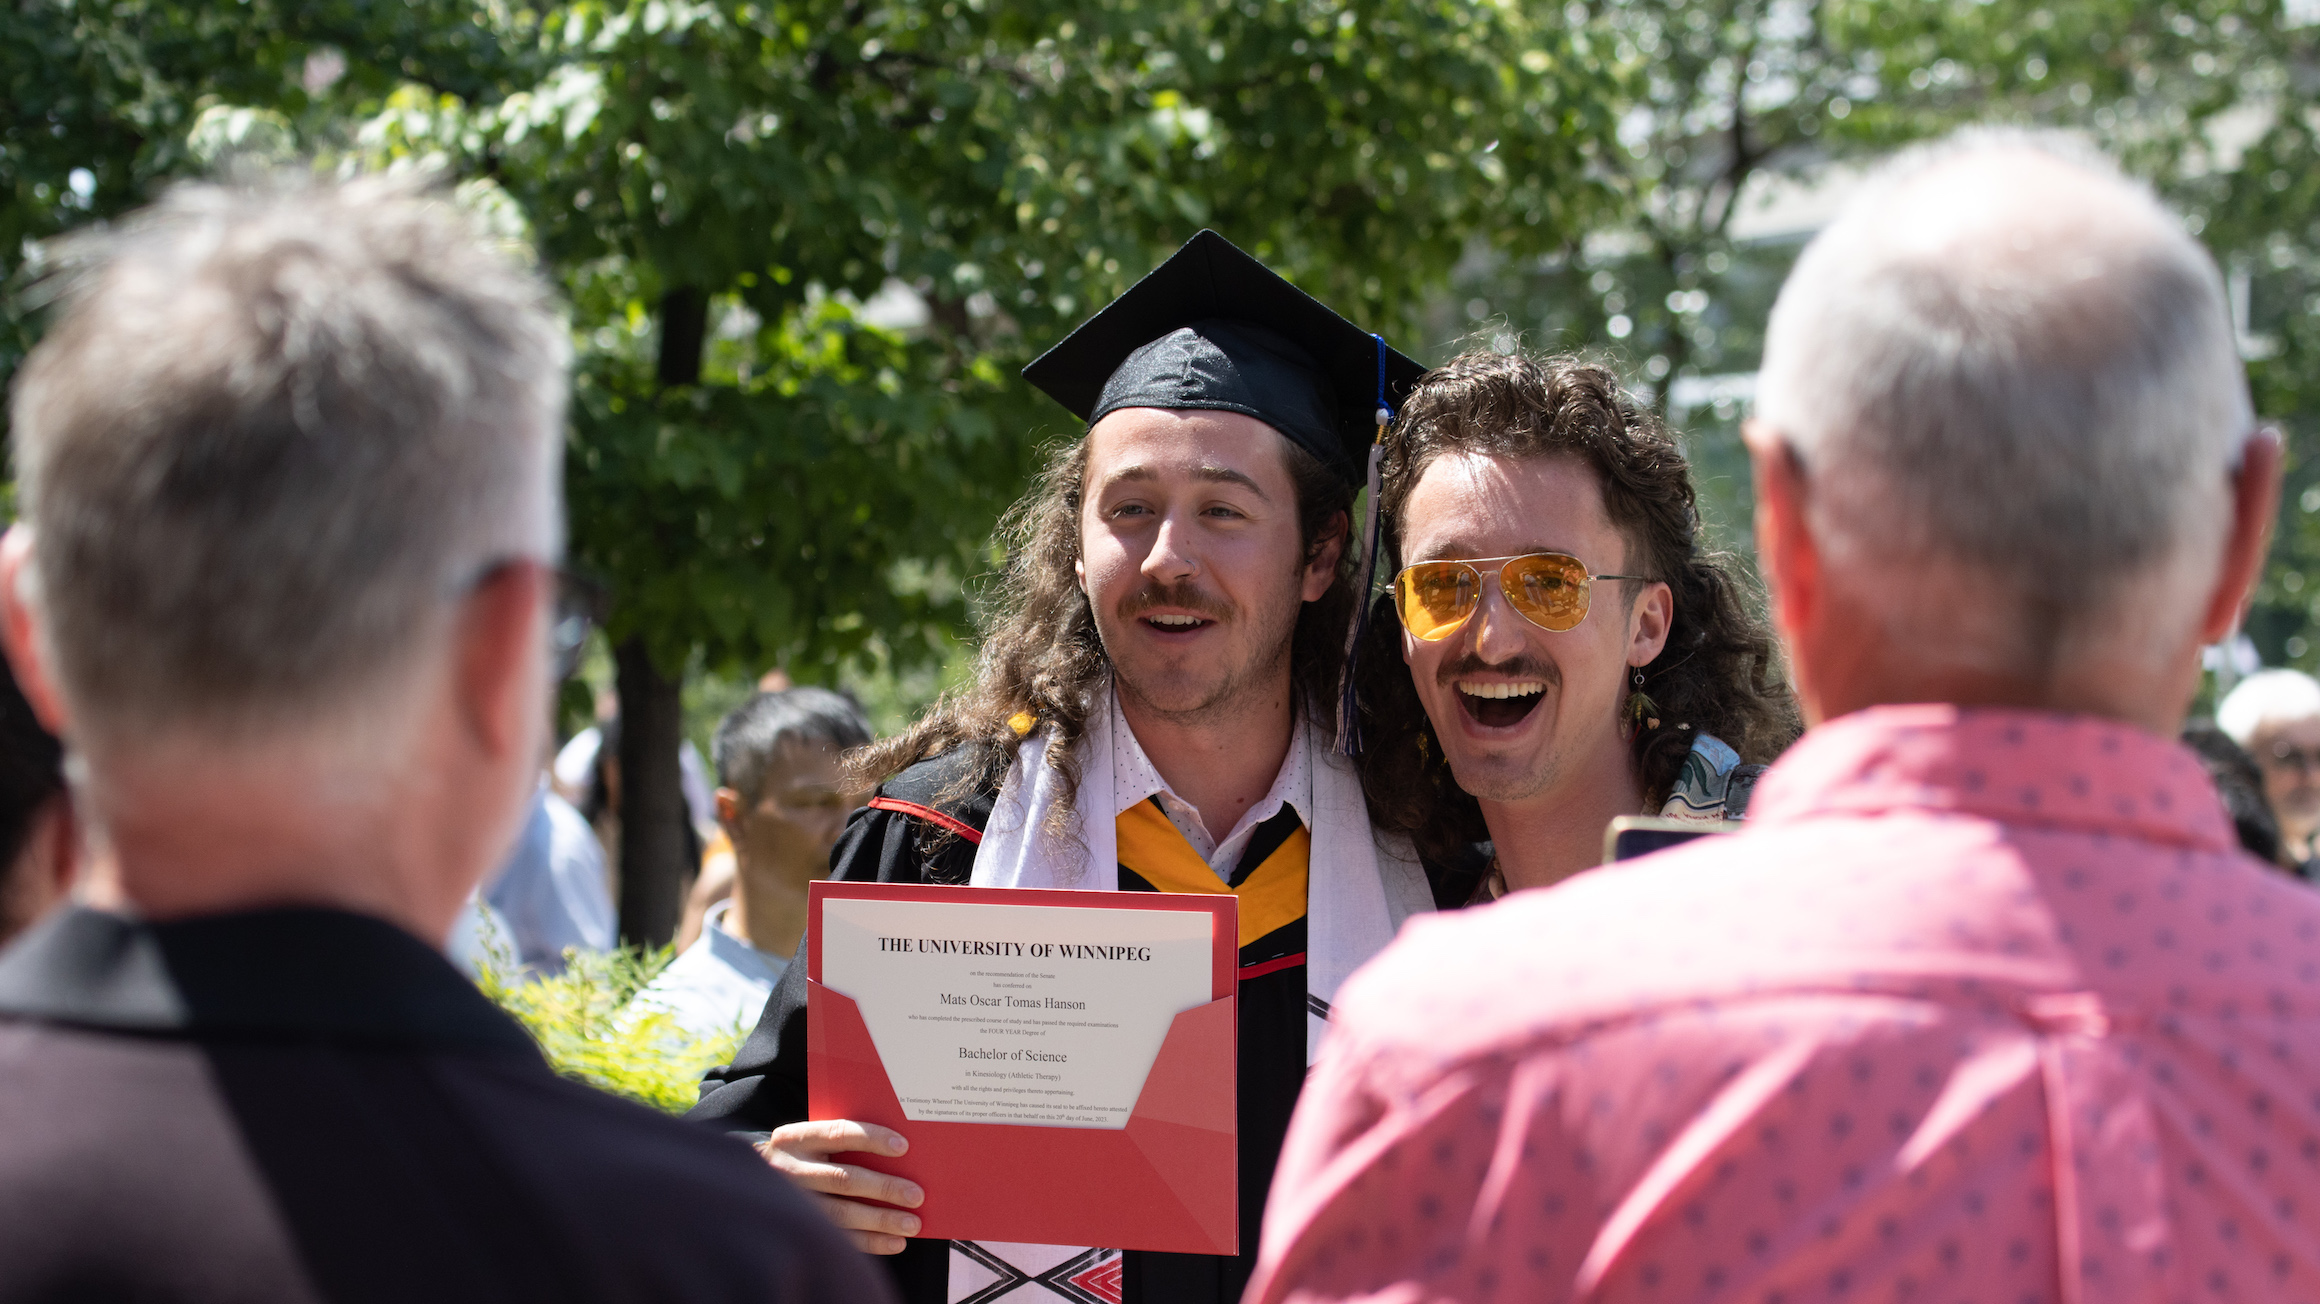 A graduate poses for a photo with a friend on campus.